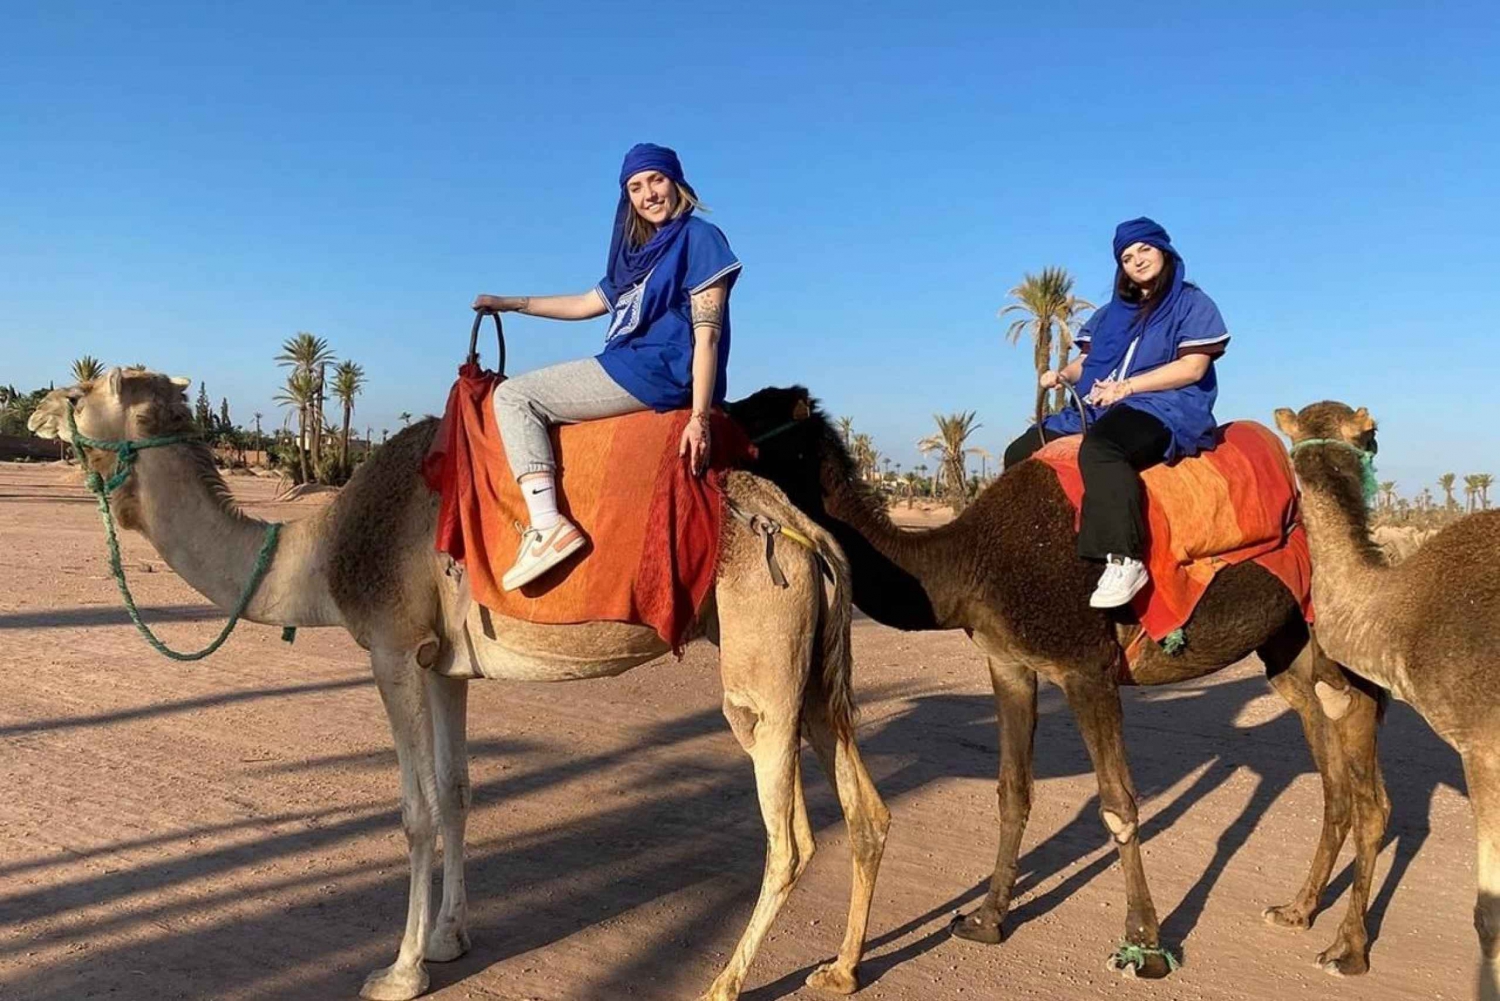 Marrakech : Exciting Camel Ride in Palmeraie